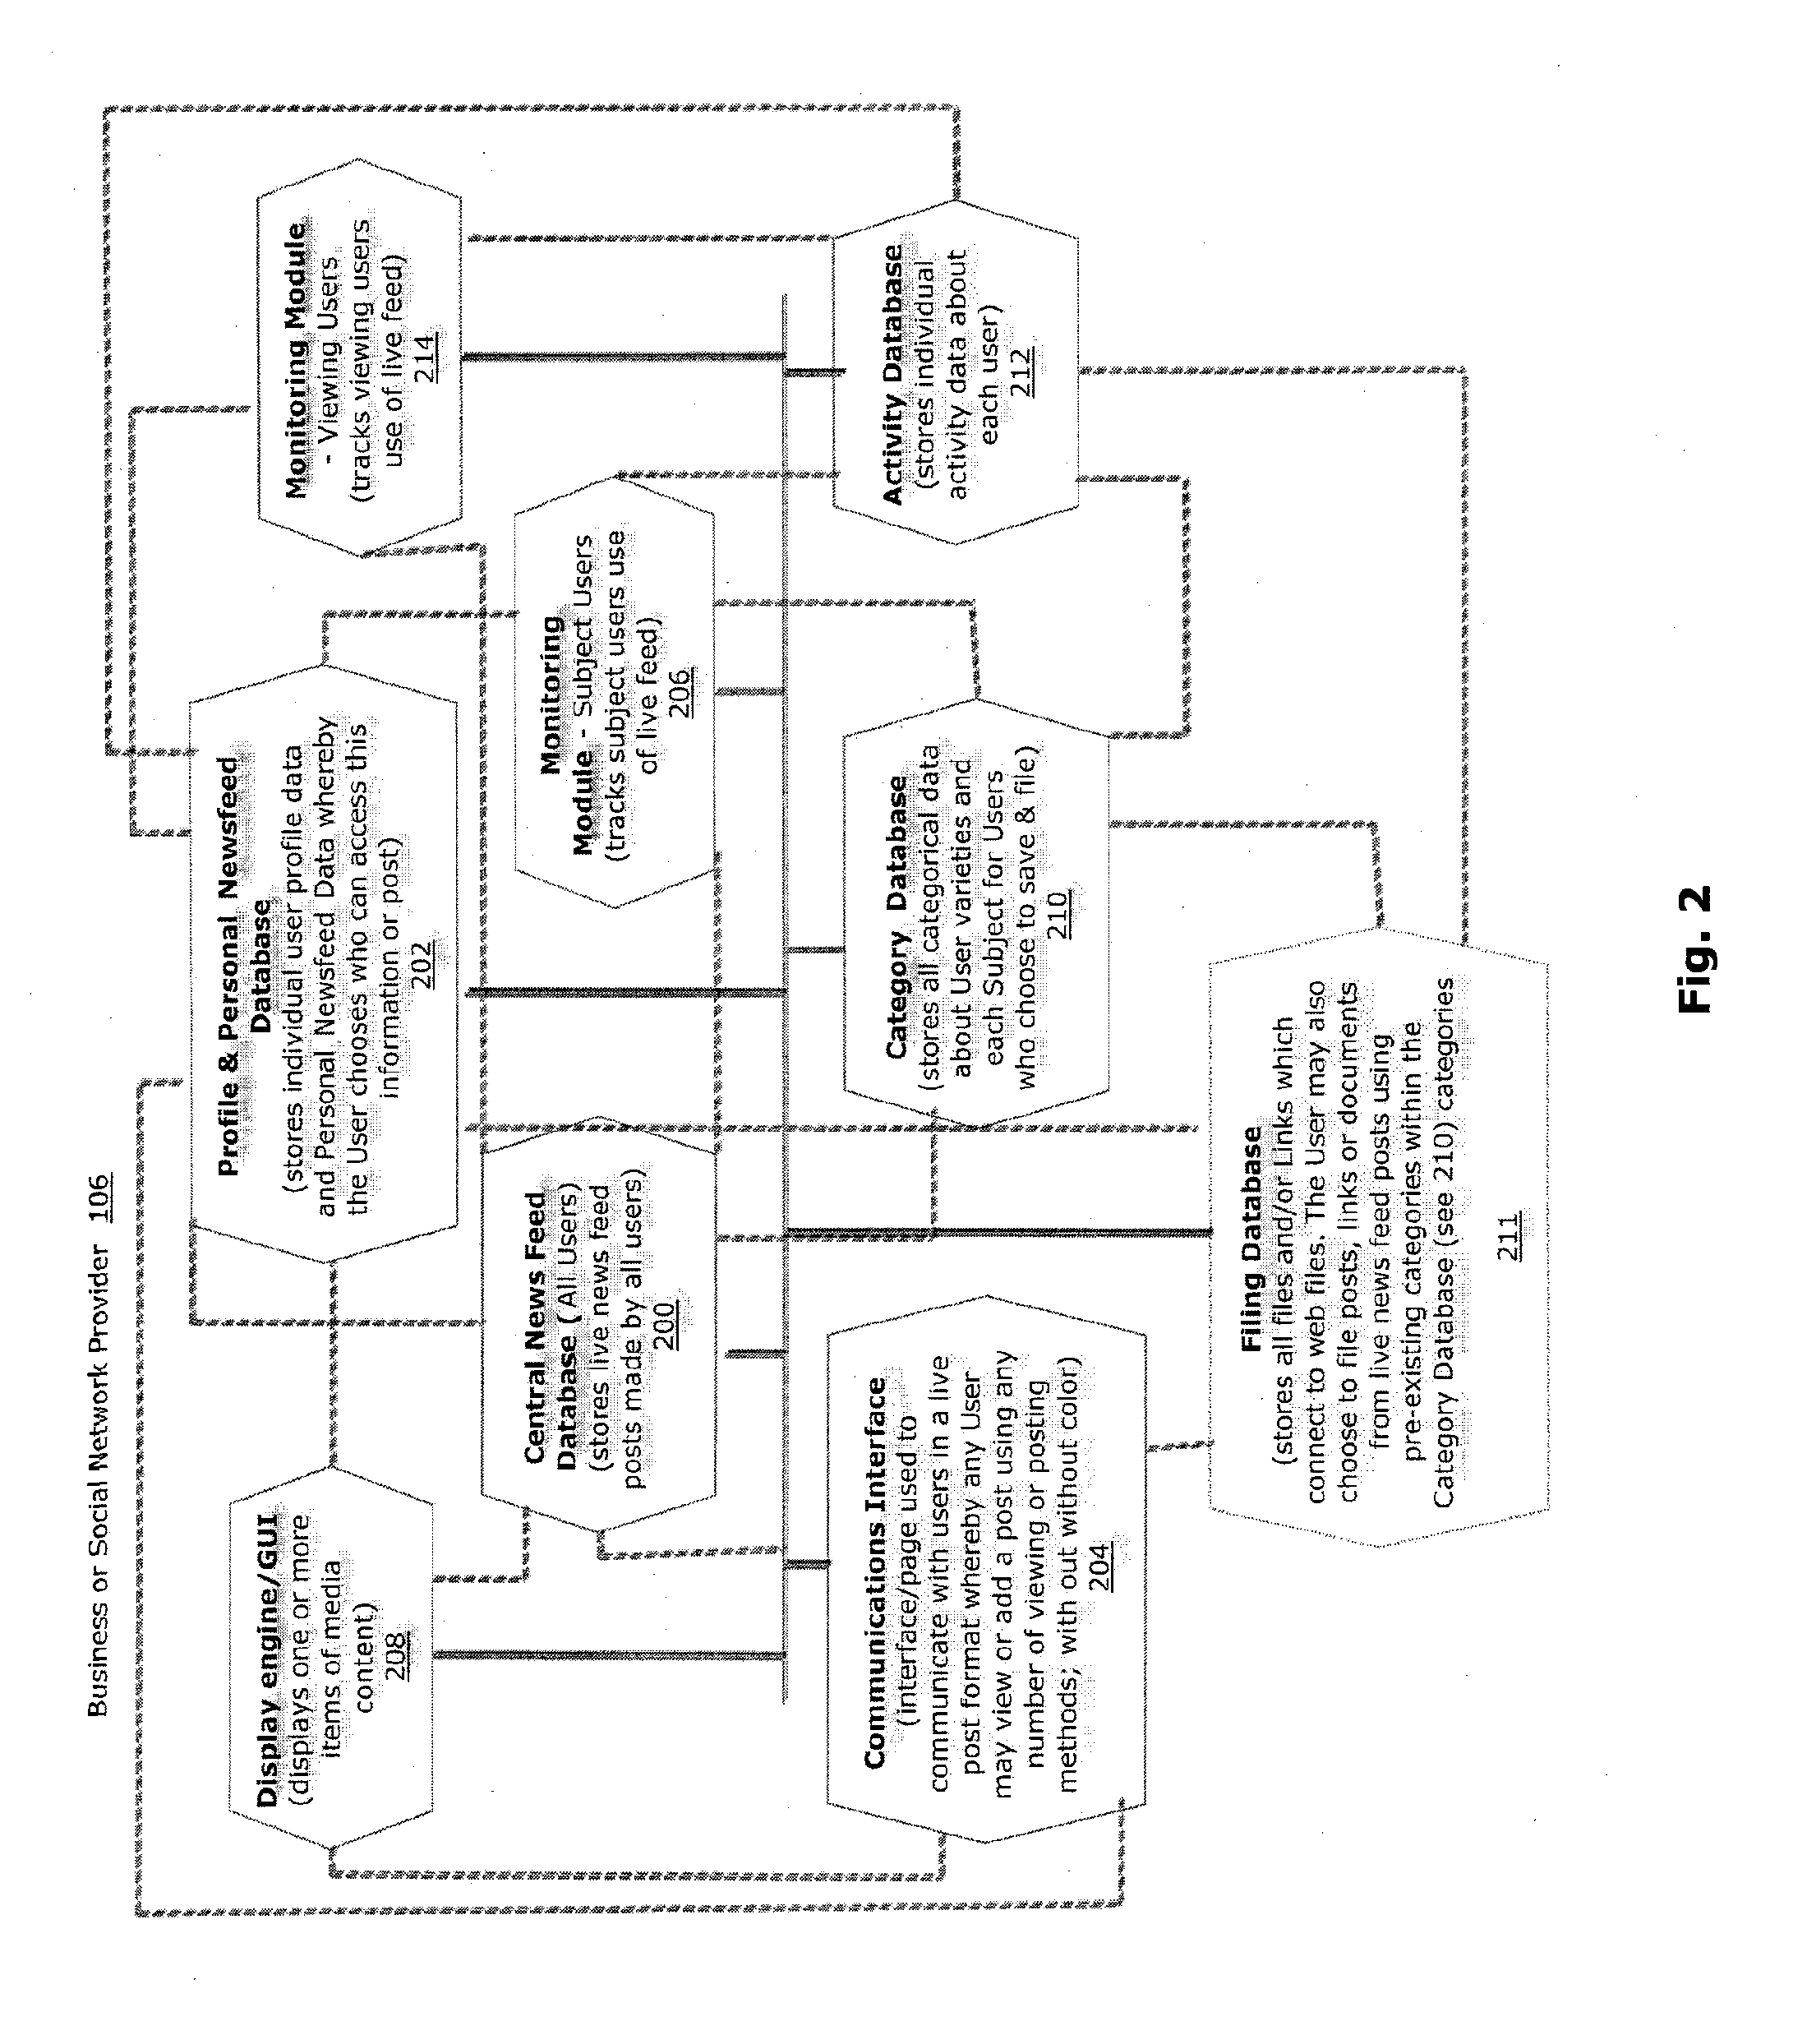 Systems and Method for Displaying and Categorizing News Feed Posts